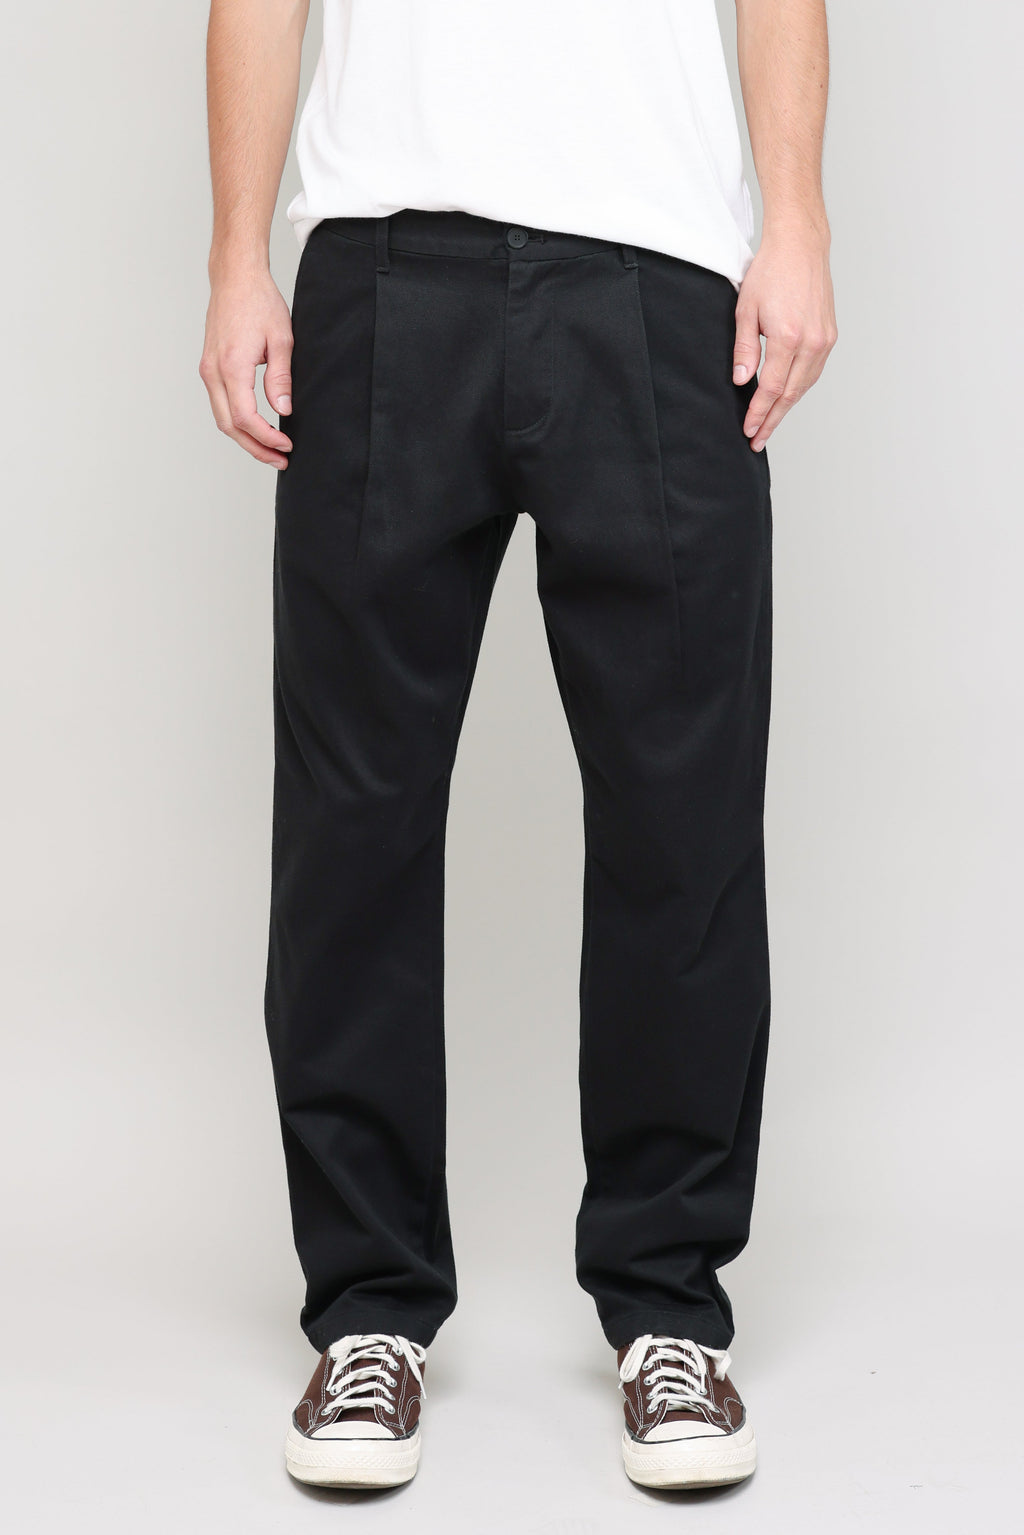 NS1201-1 Pleated Chino Texture Cloth in Black